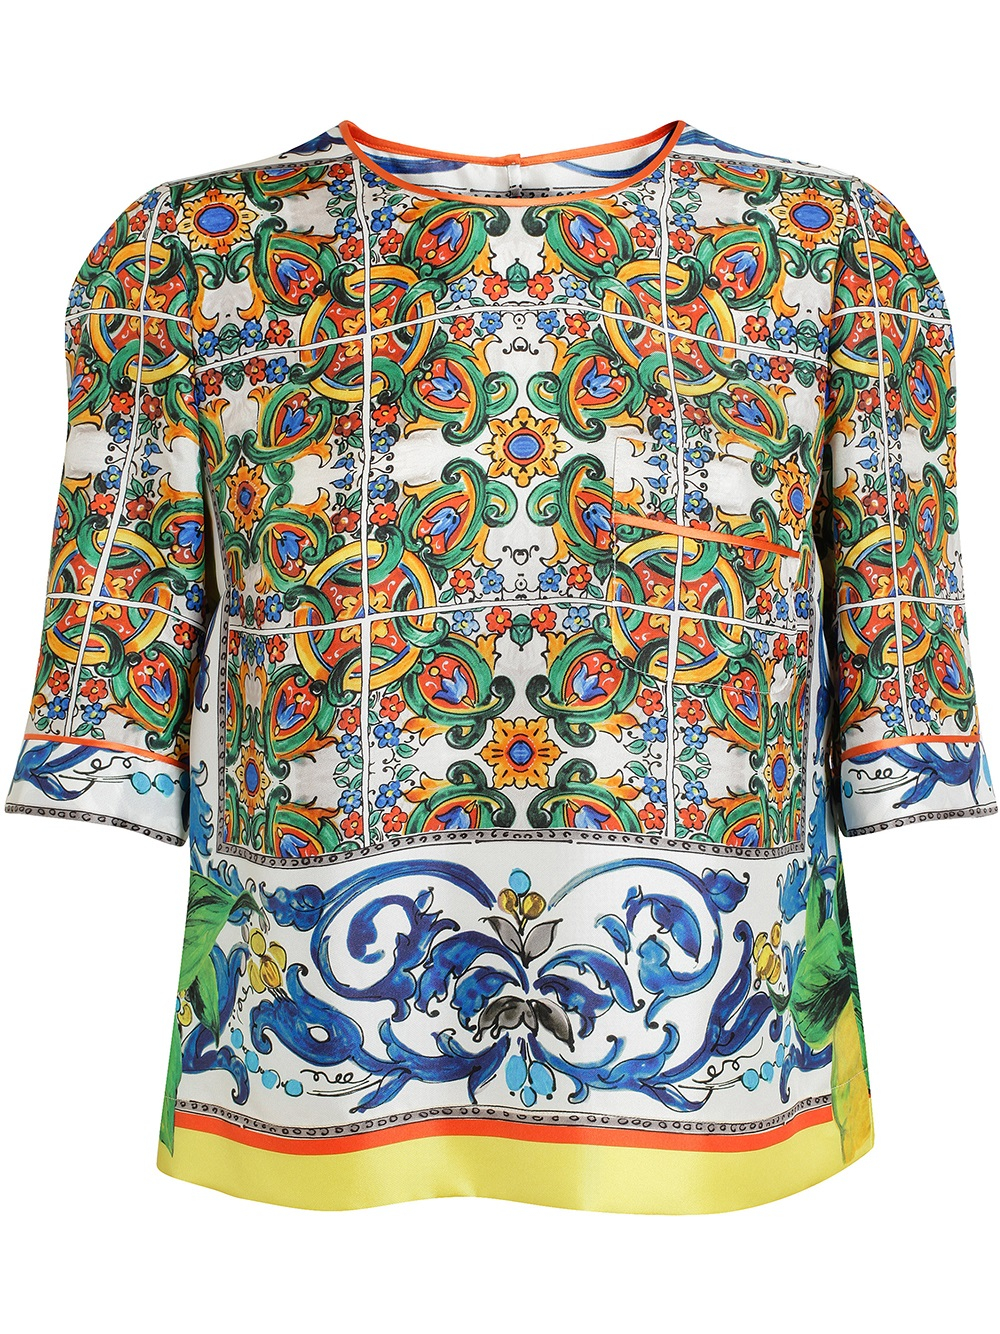 Lyst - Dolce & Gabbana White Knit with Floral Pattern Silk ...